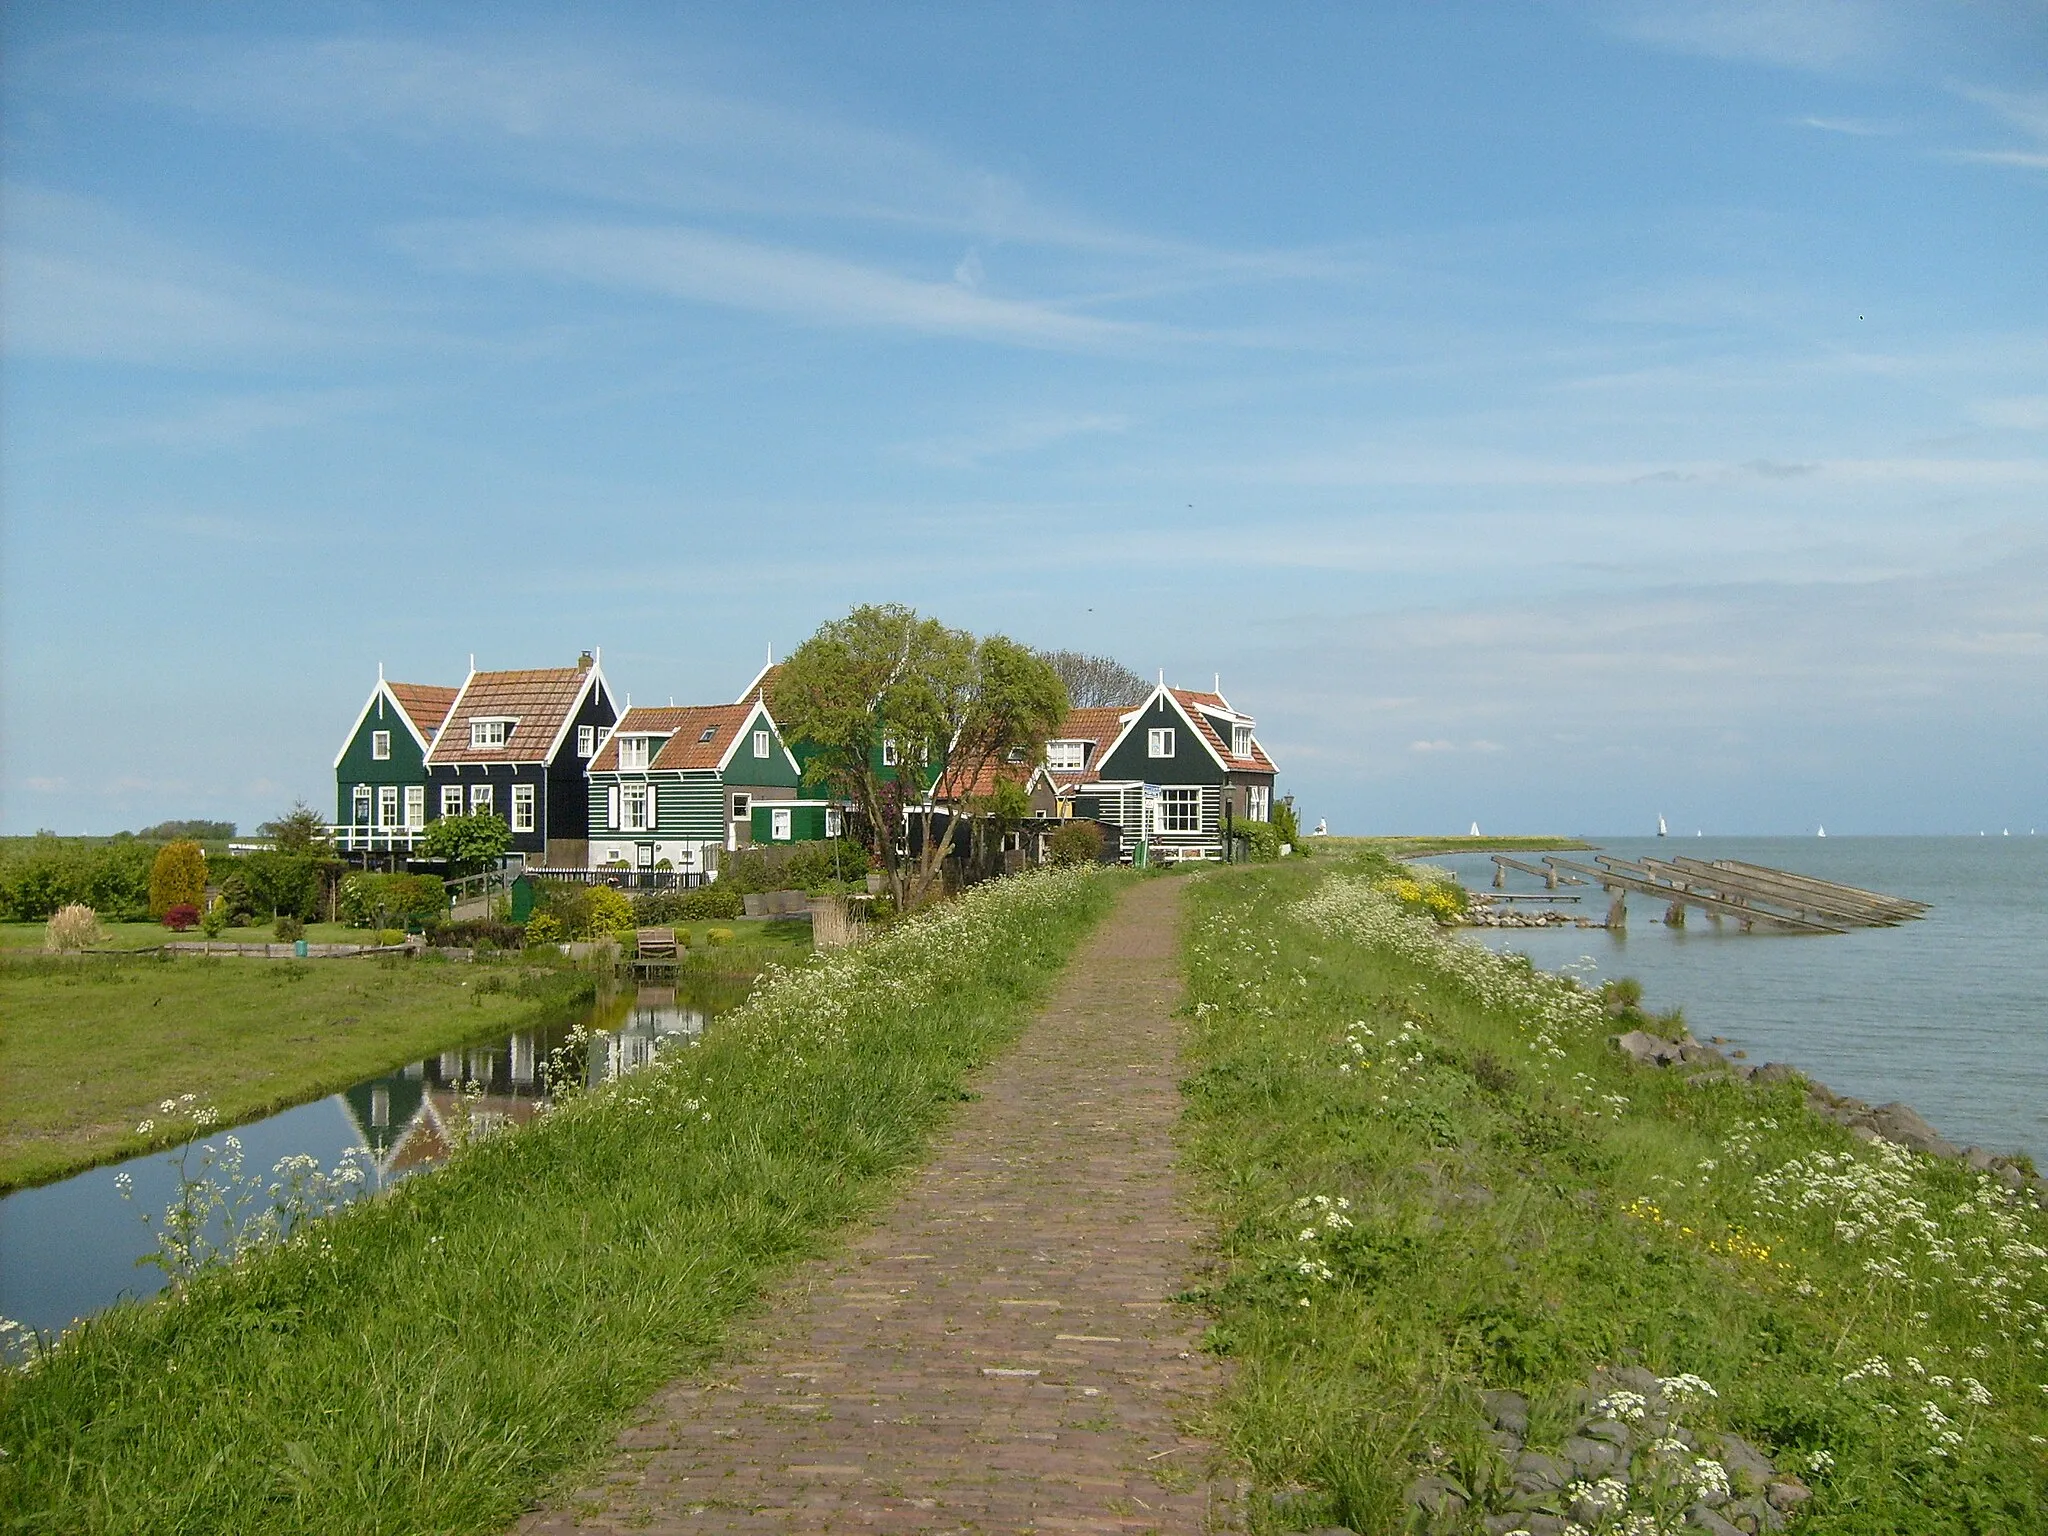 Photo showing: DescriptionRozewerf.jpg

Rozewerf
Date

14 May 2010, 16:01
Source

Rozewerf
Author

Taco Witte from Holland

Camera location 52° 27′ 15.94″ N, 5° 06′ 41.31″ E View this and other nearby images on: OpenStreetMap 52.454427;    5.111474 Licensing This file is licensed under the Creative Commons Attribution 2.0 Generic license.
You are free:
to share – to copy, distribute and transmit the work
to remix – to adapt the work
Under the following conditions:
attribution – You must give appropriate credit, provide a link to the license, and indicate if changes were made. You may do so in any reasonable manner, but not in any way that suggests the licensor endorses you or your use. https://creativecommons.org/licenses/by/2.0CC BY 2.0 Creative Commons Attribution 2.0 truetrue

This image was originally posted to Flickr by inyucho at https://flickr.com/photos/31817492@N00/4607105208. It was reviewed on 15 May 2010 by FlickreviewR and was confirmed to be licensed under the terms of the cc-by-2.0.
15 May 2010